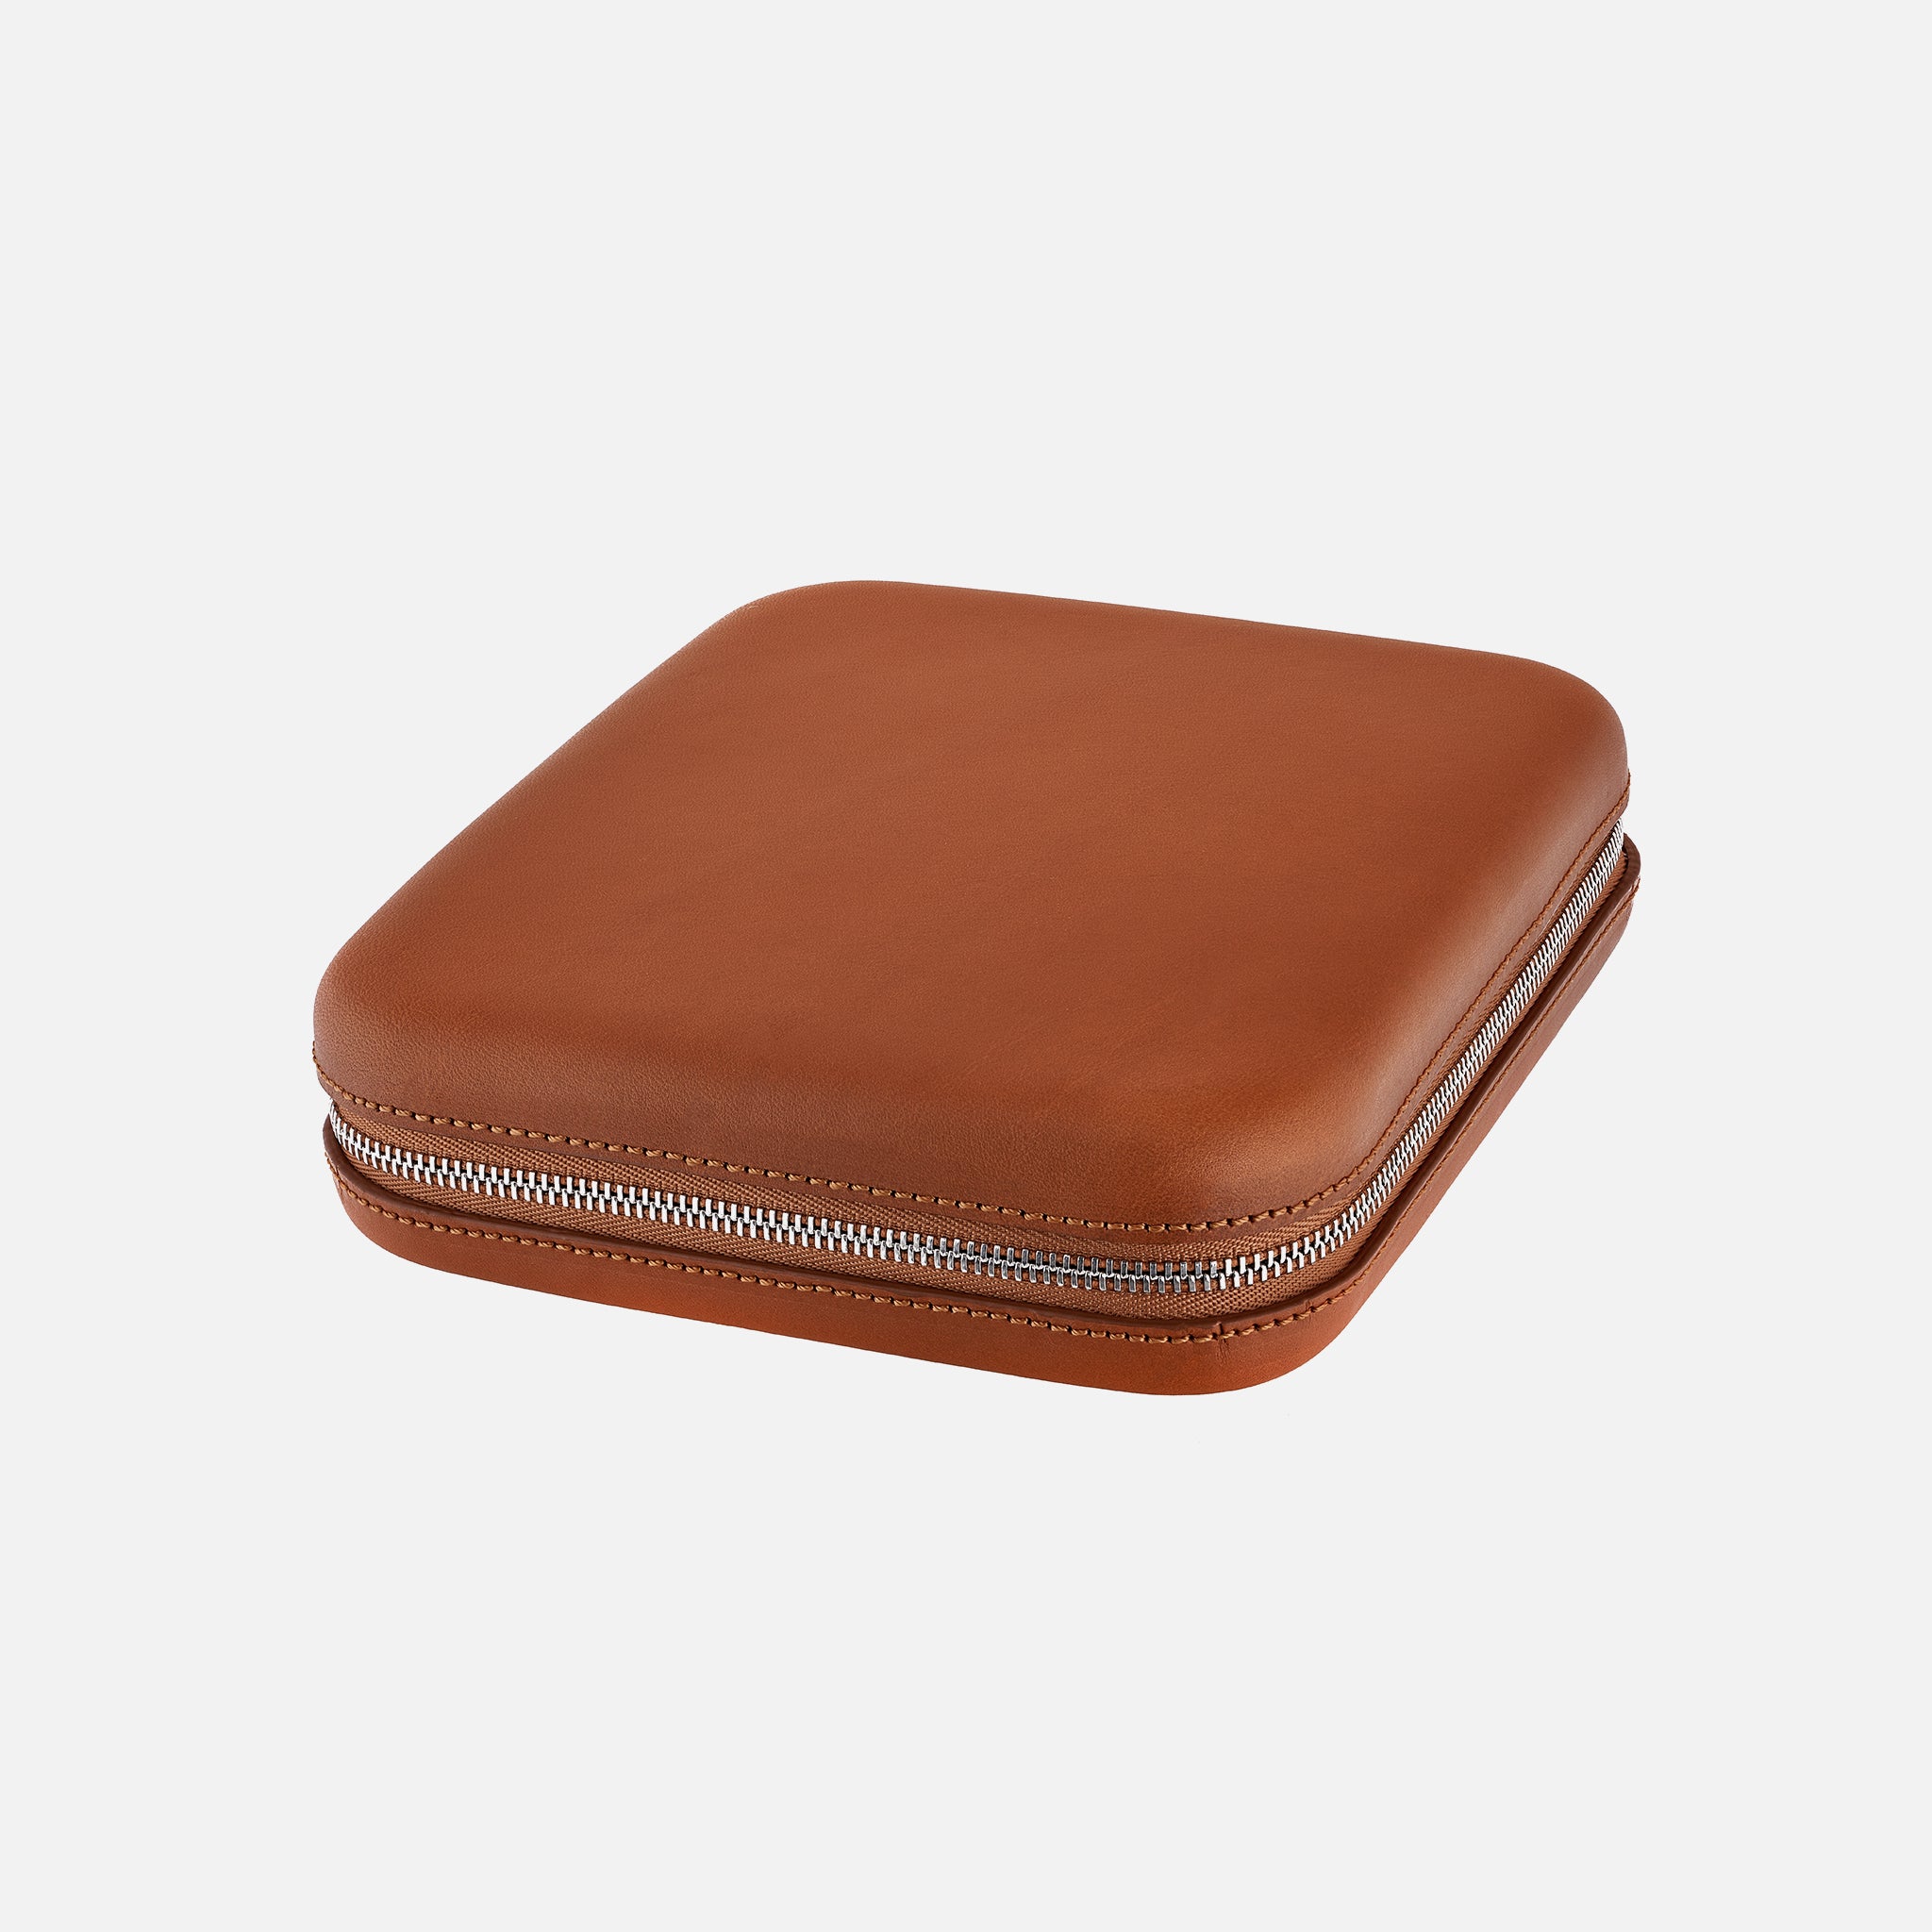 Image of Light Brown Moulded Oak-Tanned Leather Watch Case For Six Watches